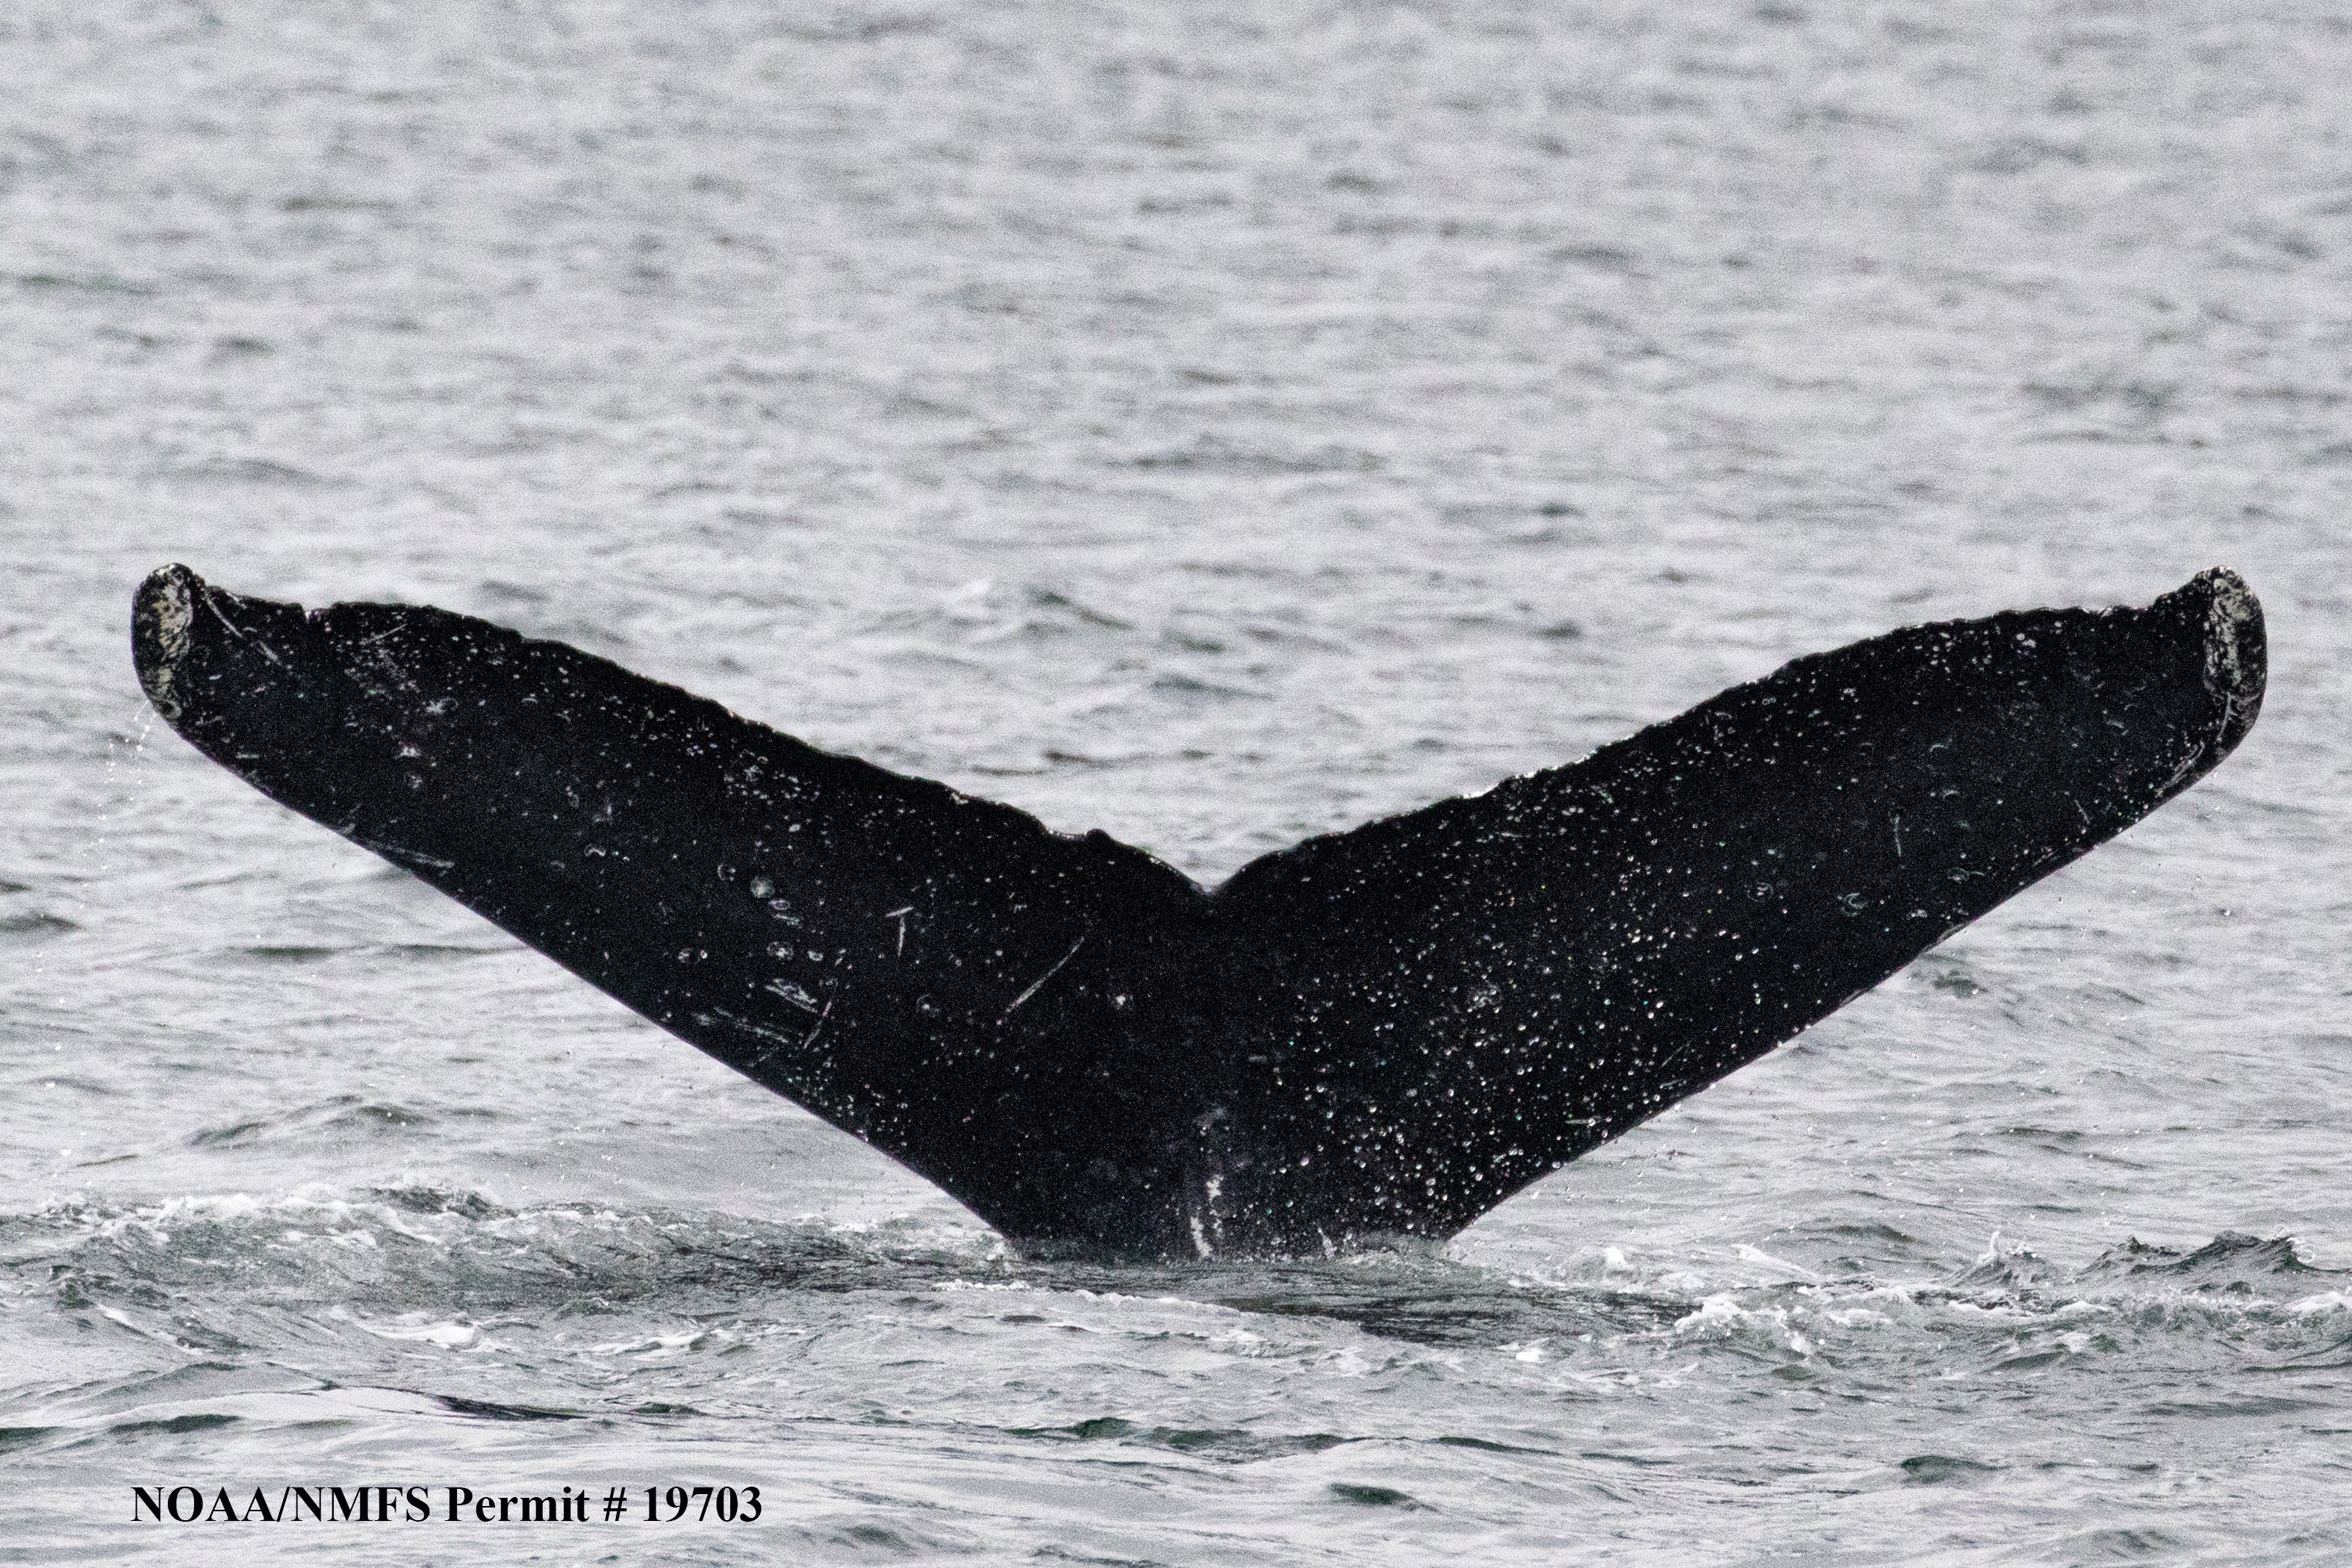 Scientists Hold A 20-Minute ‘Conversation’ With A Whale Named Twain In His Own Language